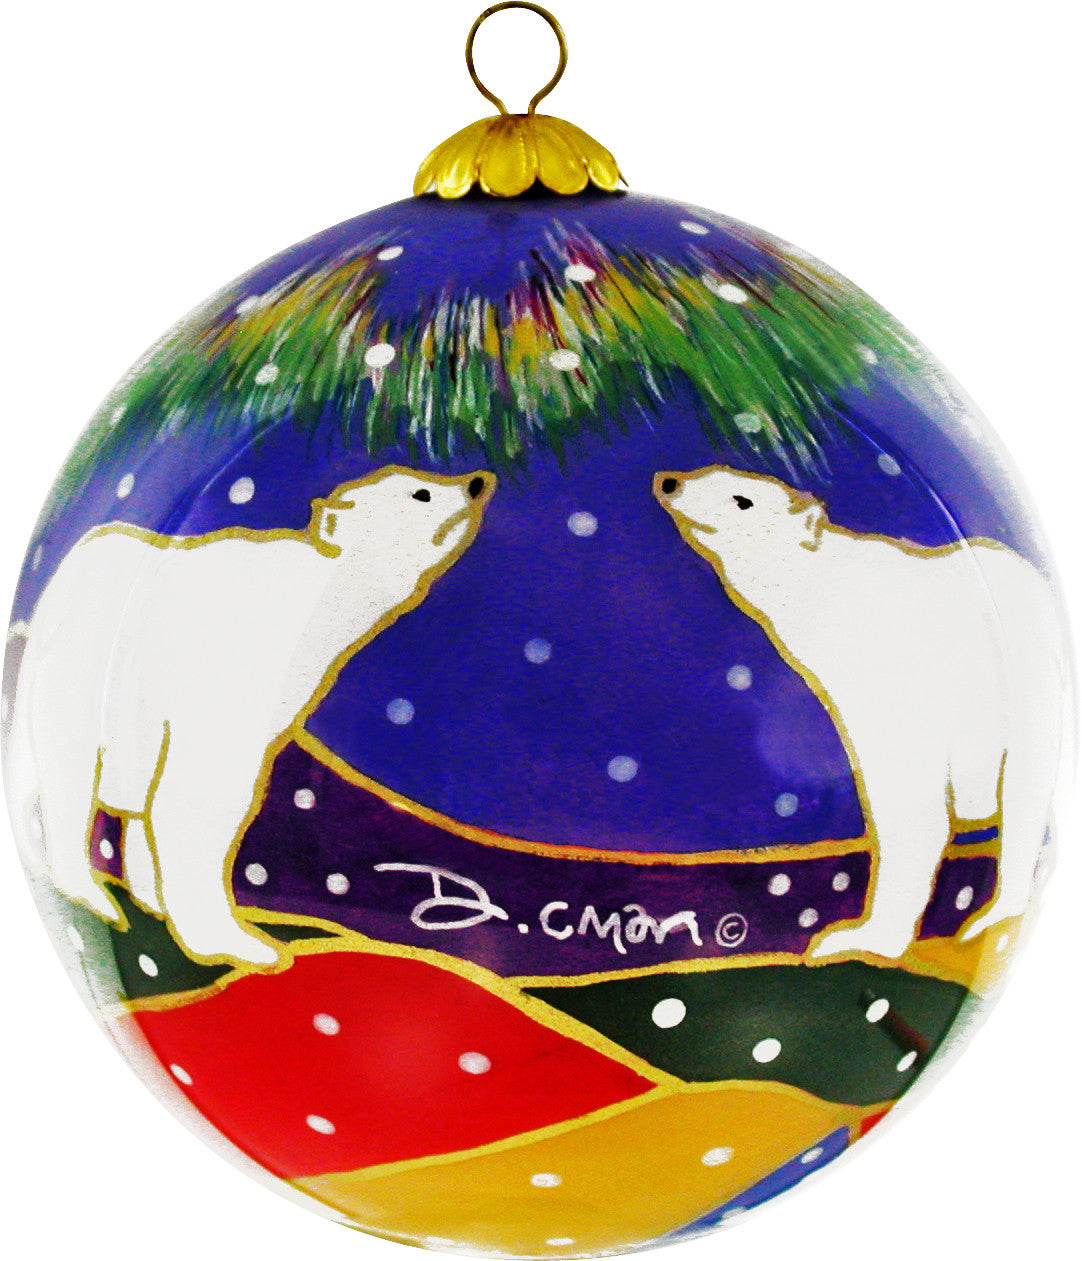 Dawn Oman Sky Watchers Glass Ornament - Out of Stock